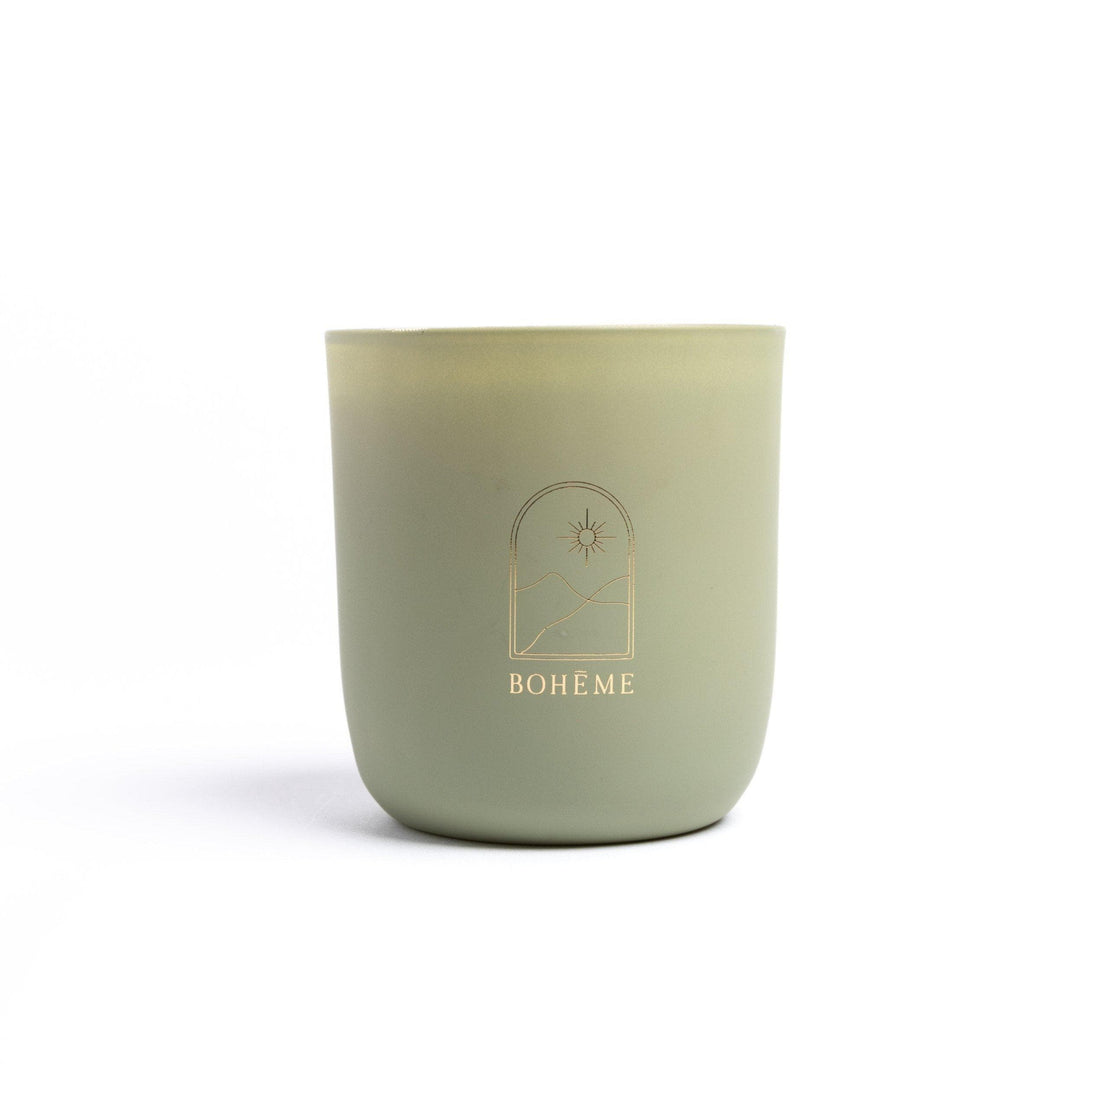 Jill & Ally  Chill vibes crystal candle votive trio